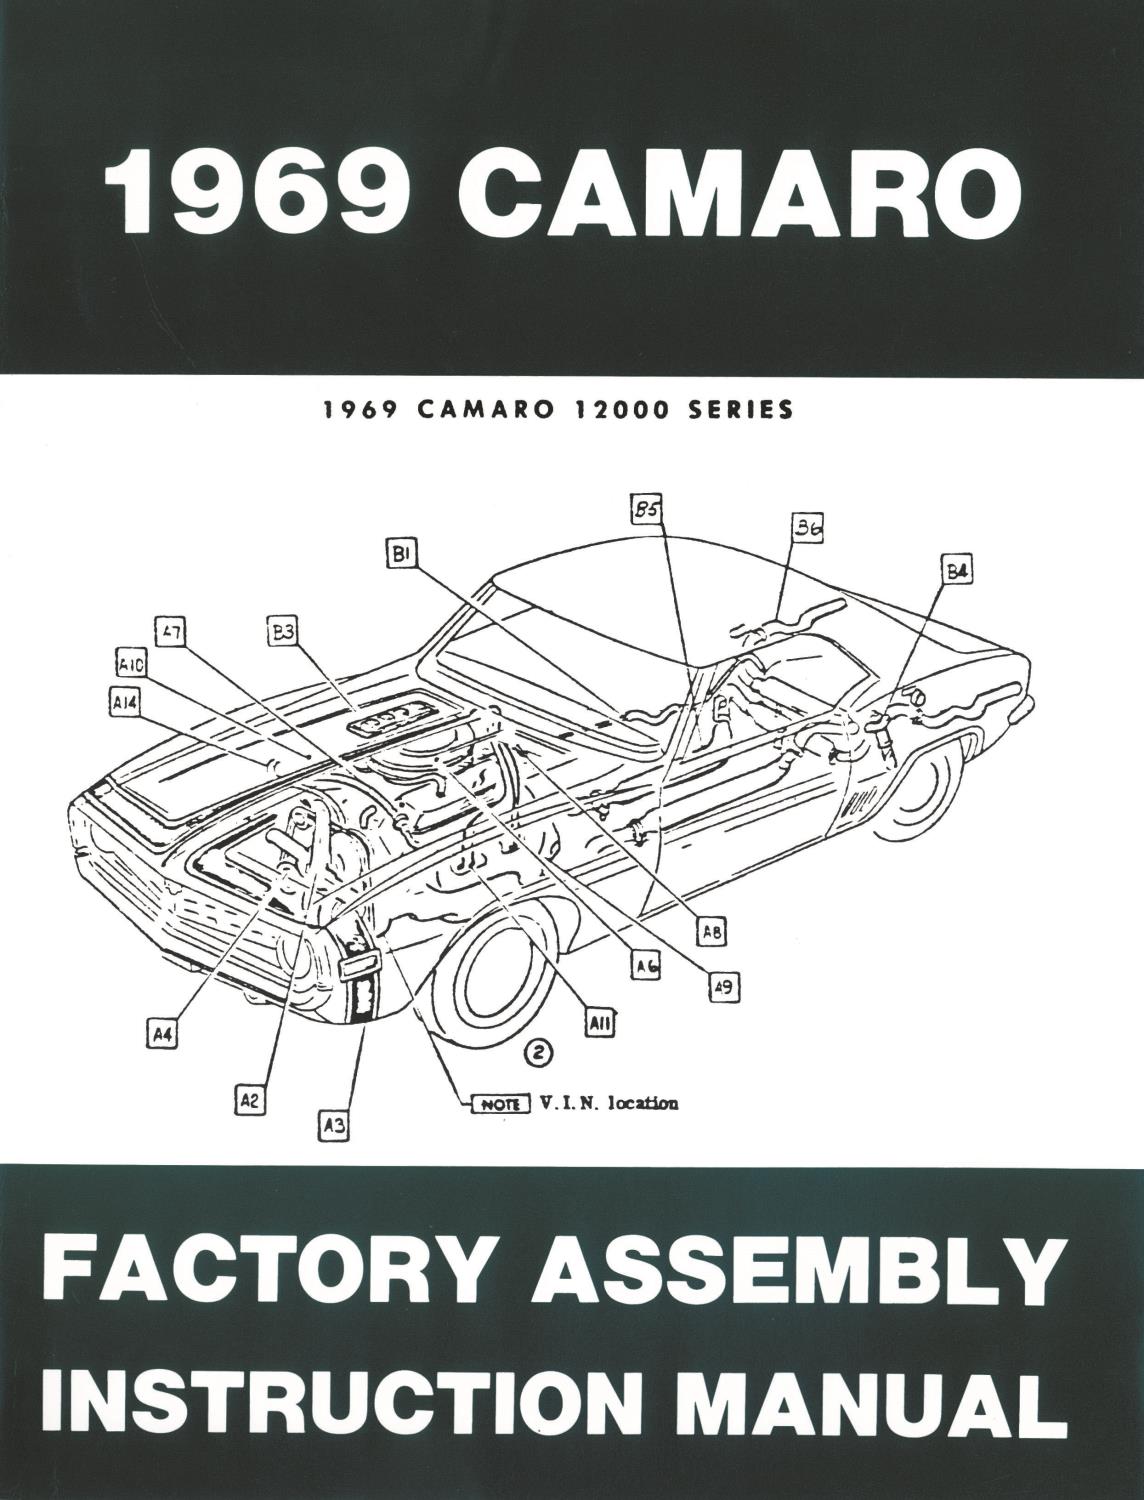 Factory Assembly Instruction Manual for 1969 Chevrolet Camaro